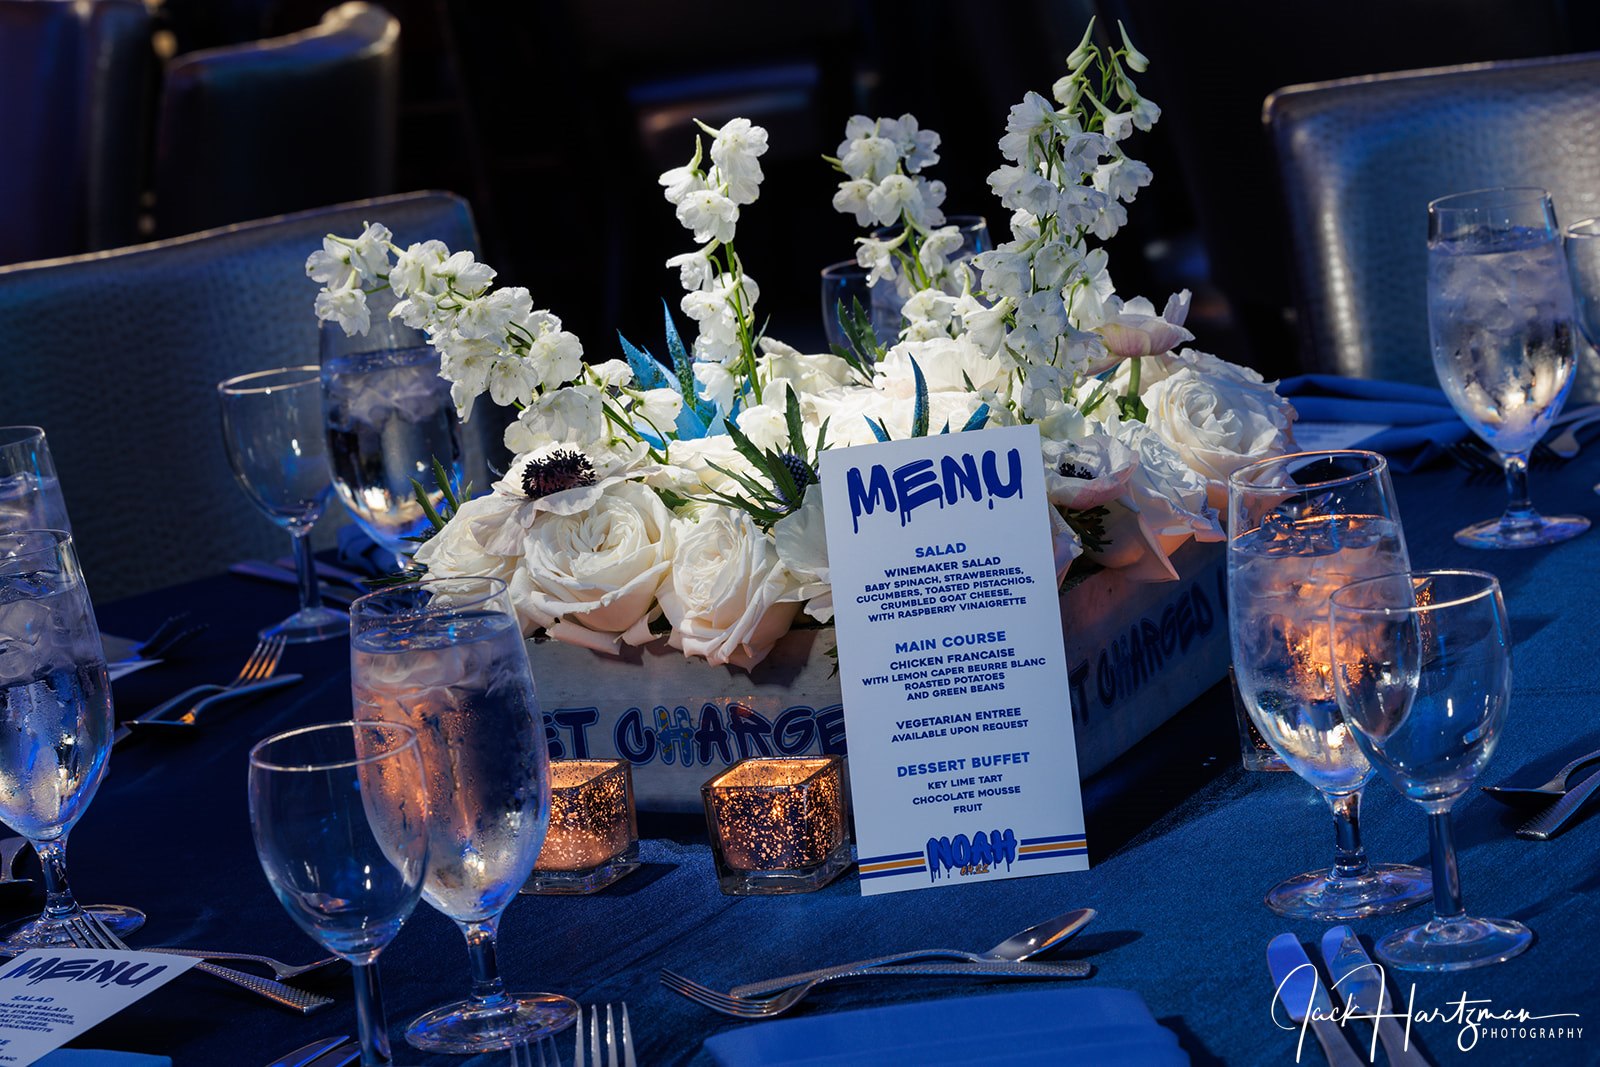 Centerpieces at Noah's Chargers-Inspired Urban, Graffiti Bar Mitzvah at Woodmont Country Club in Rockville, MD | Pop Color Events | Adding a Pop of Color to Bar & Bat Mitzvahs in DC, MD & VA | Photo by: Jack Hartzman, Washington Talent Agency